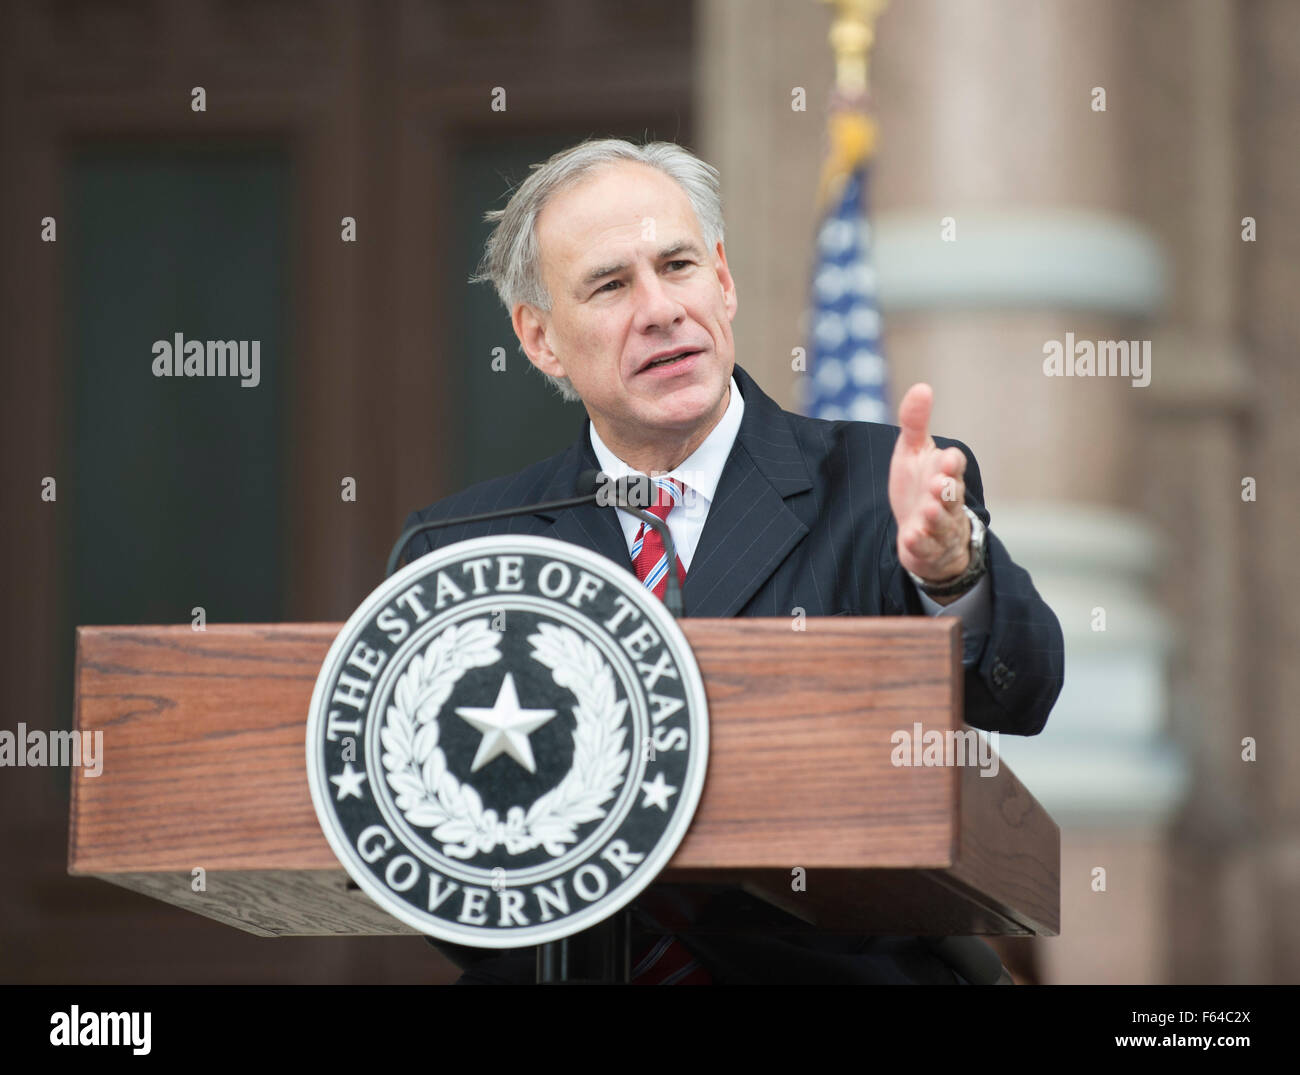 Austin, Texas USA November 11, 2015: Texas Gov. Greg Abbott speaks during the Veteran's Day parade up Congress Avenue and ceremony at the Texas Capitol. Several thousand Texans lined Congress Avenue to witness military heroes, marching bands and floats in the annual parade. Credit:  Bob Daemmrich/Alamy Live News Stock Photo